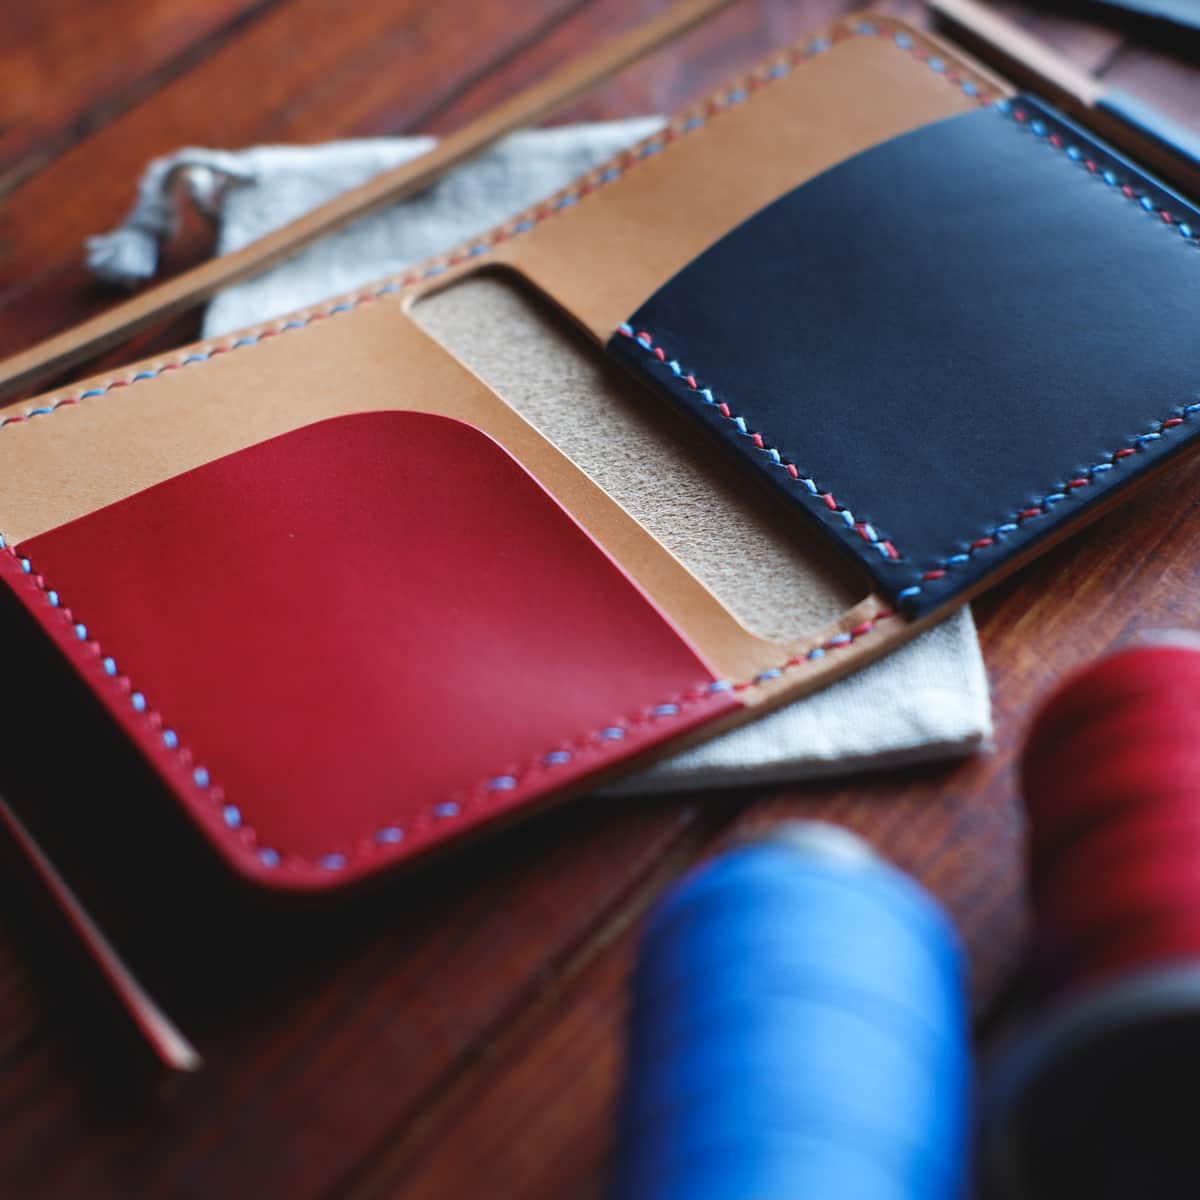 Interior of The Mountain Bifold wallet in Biscuit/Natural/Red/Blue Buttero full grain vegetable tanned leather